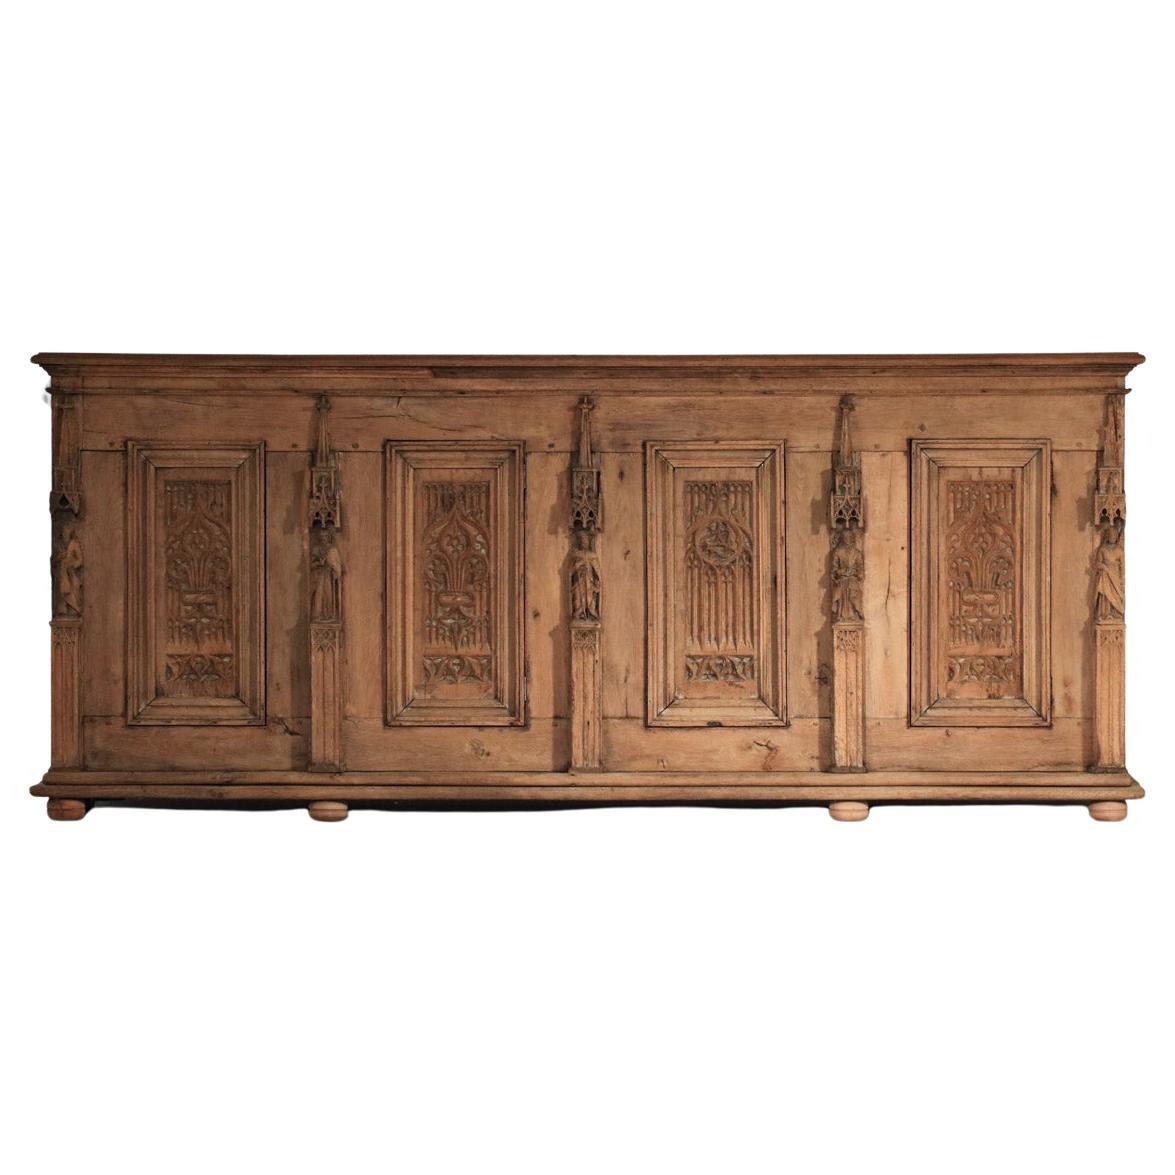 Gothic sideboard from the 1910s/1920s. Entirely hand-carved in solid wood, this work of art was certainly commissioned for a church. Superb detail in the figures and rosettes that adorn the entire buffet. The cabinet has been sandblasted in the